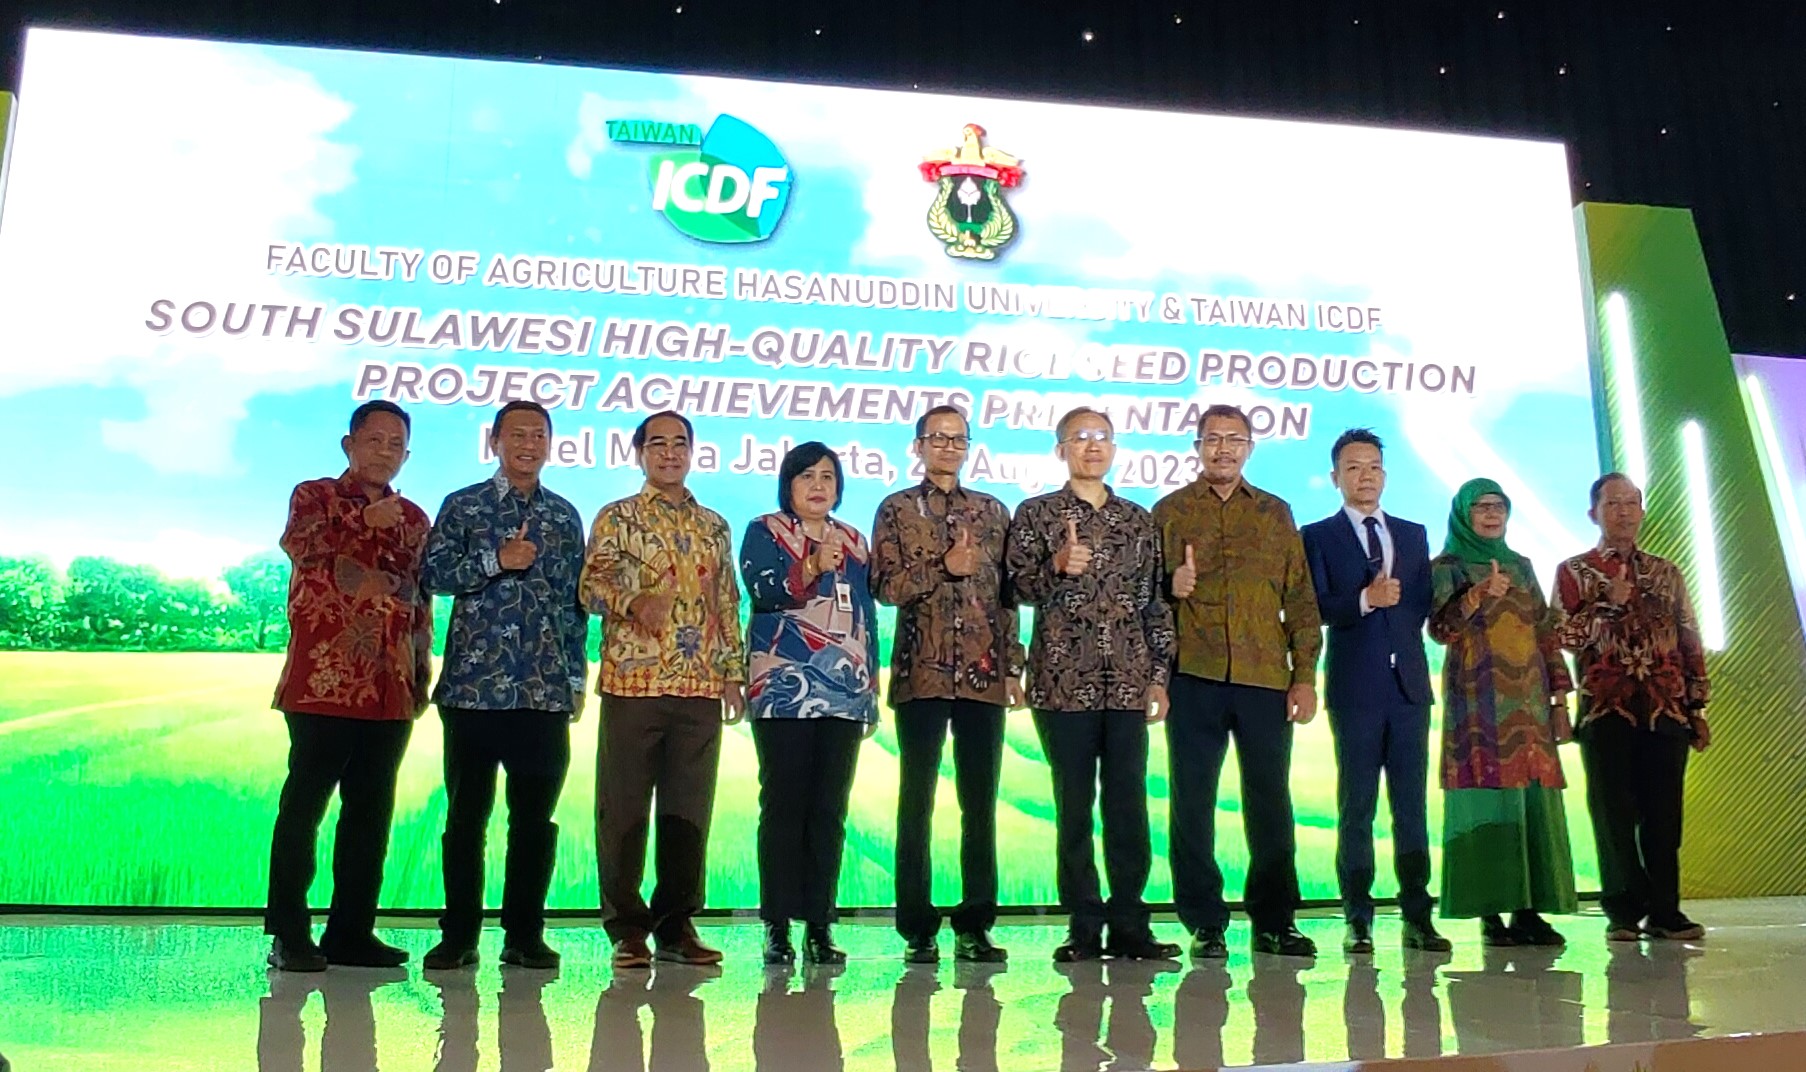 TaiwanICDF assists Indonesia with high-quality rice seed production and publishes results with Hasanuddin University